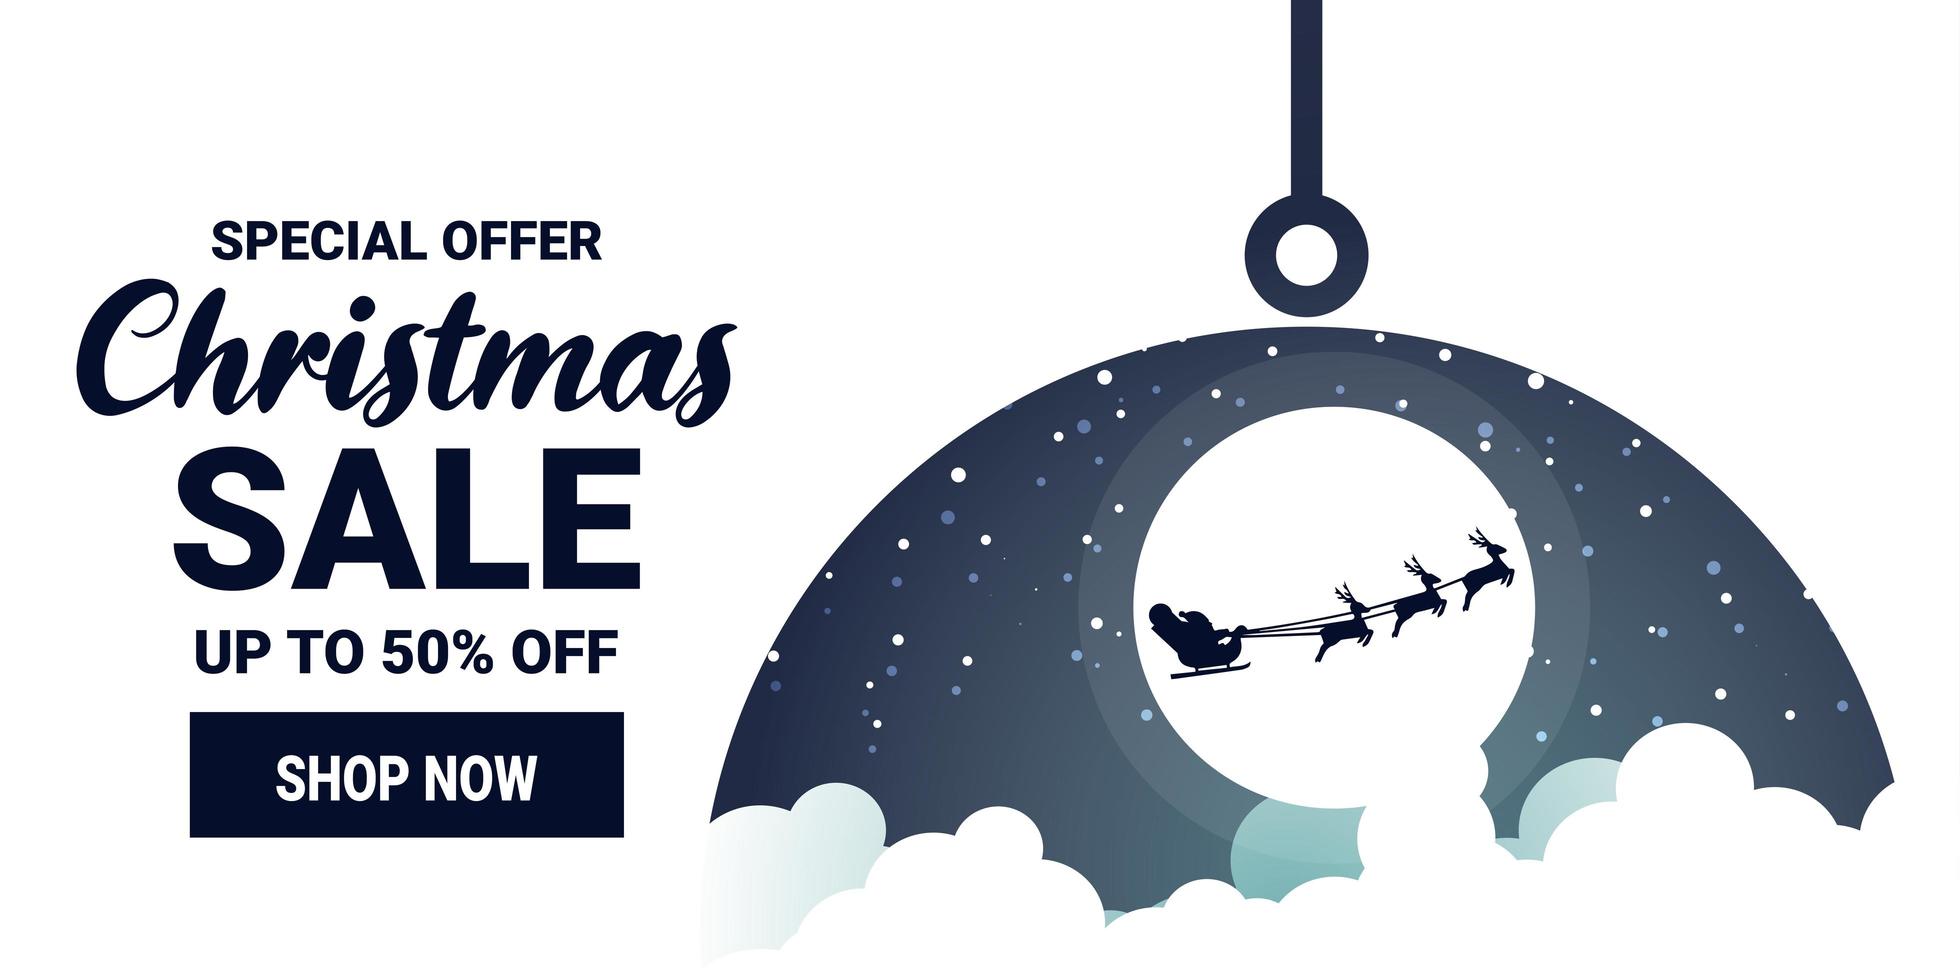 Christmas and winter sale promotion marketing banner vector